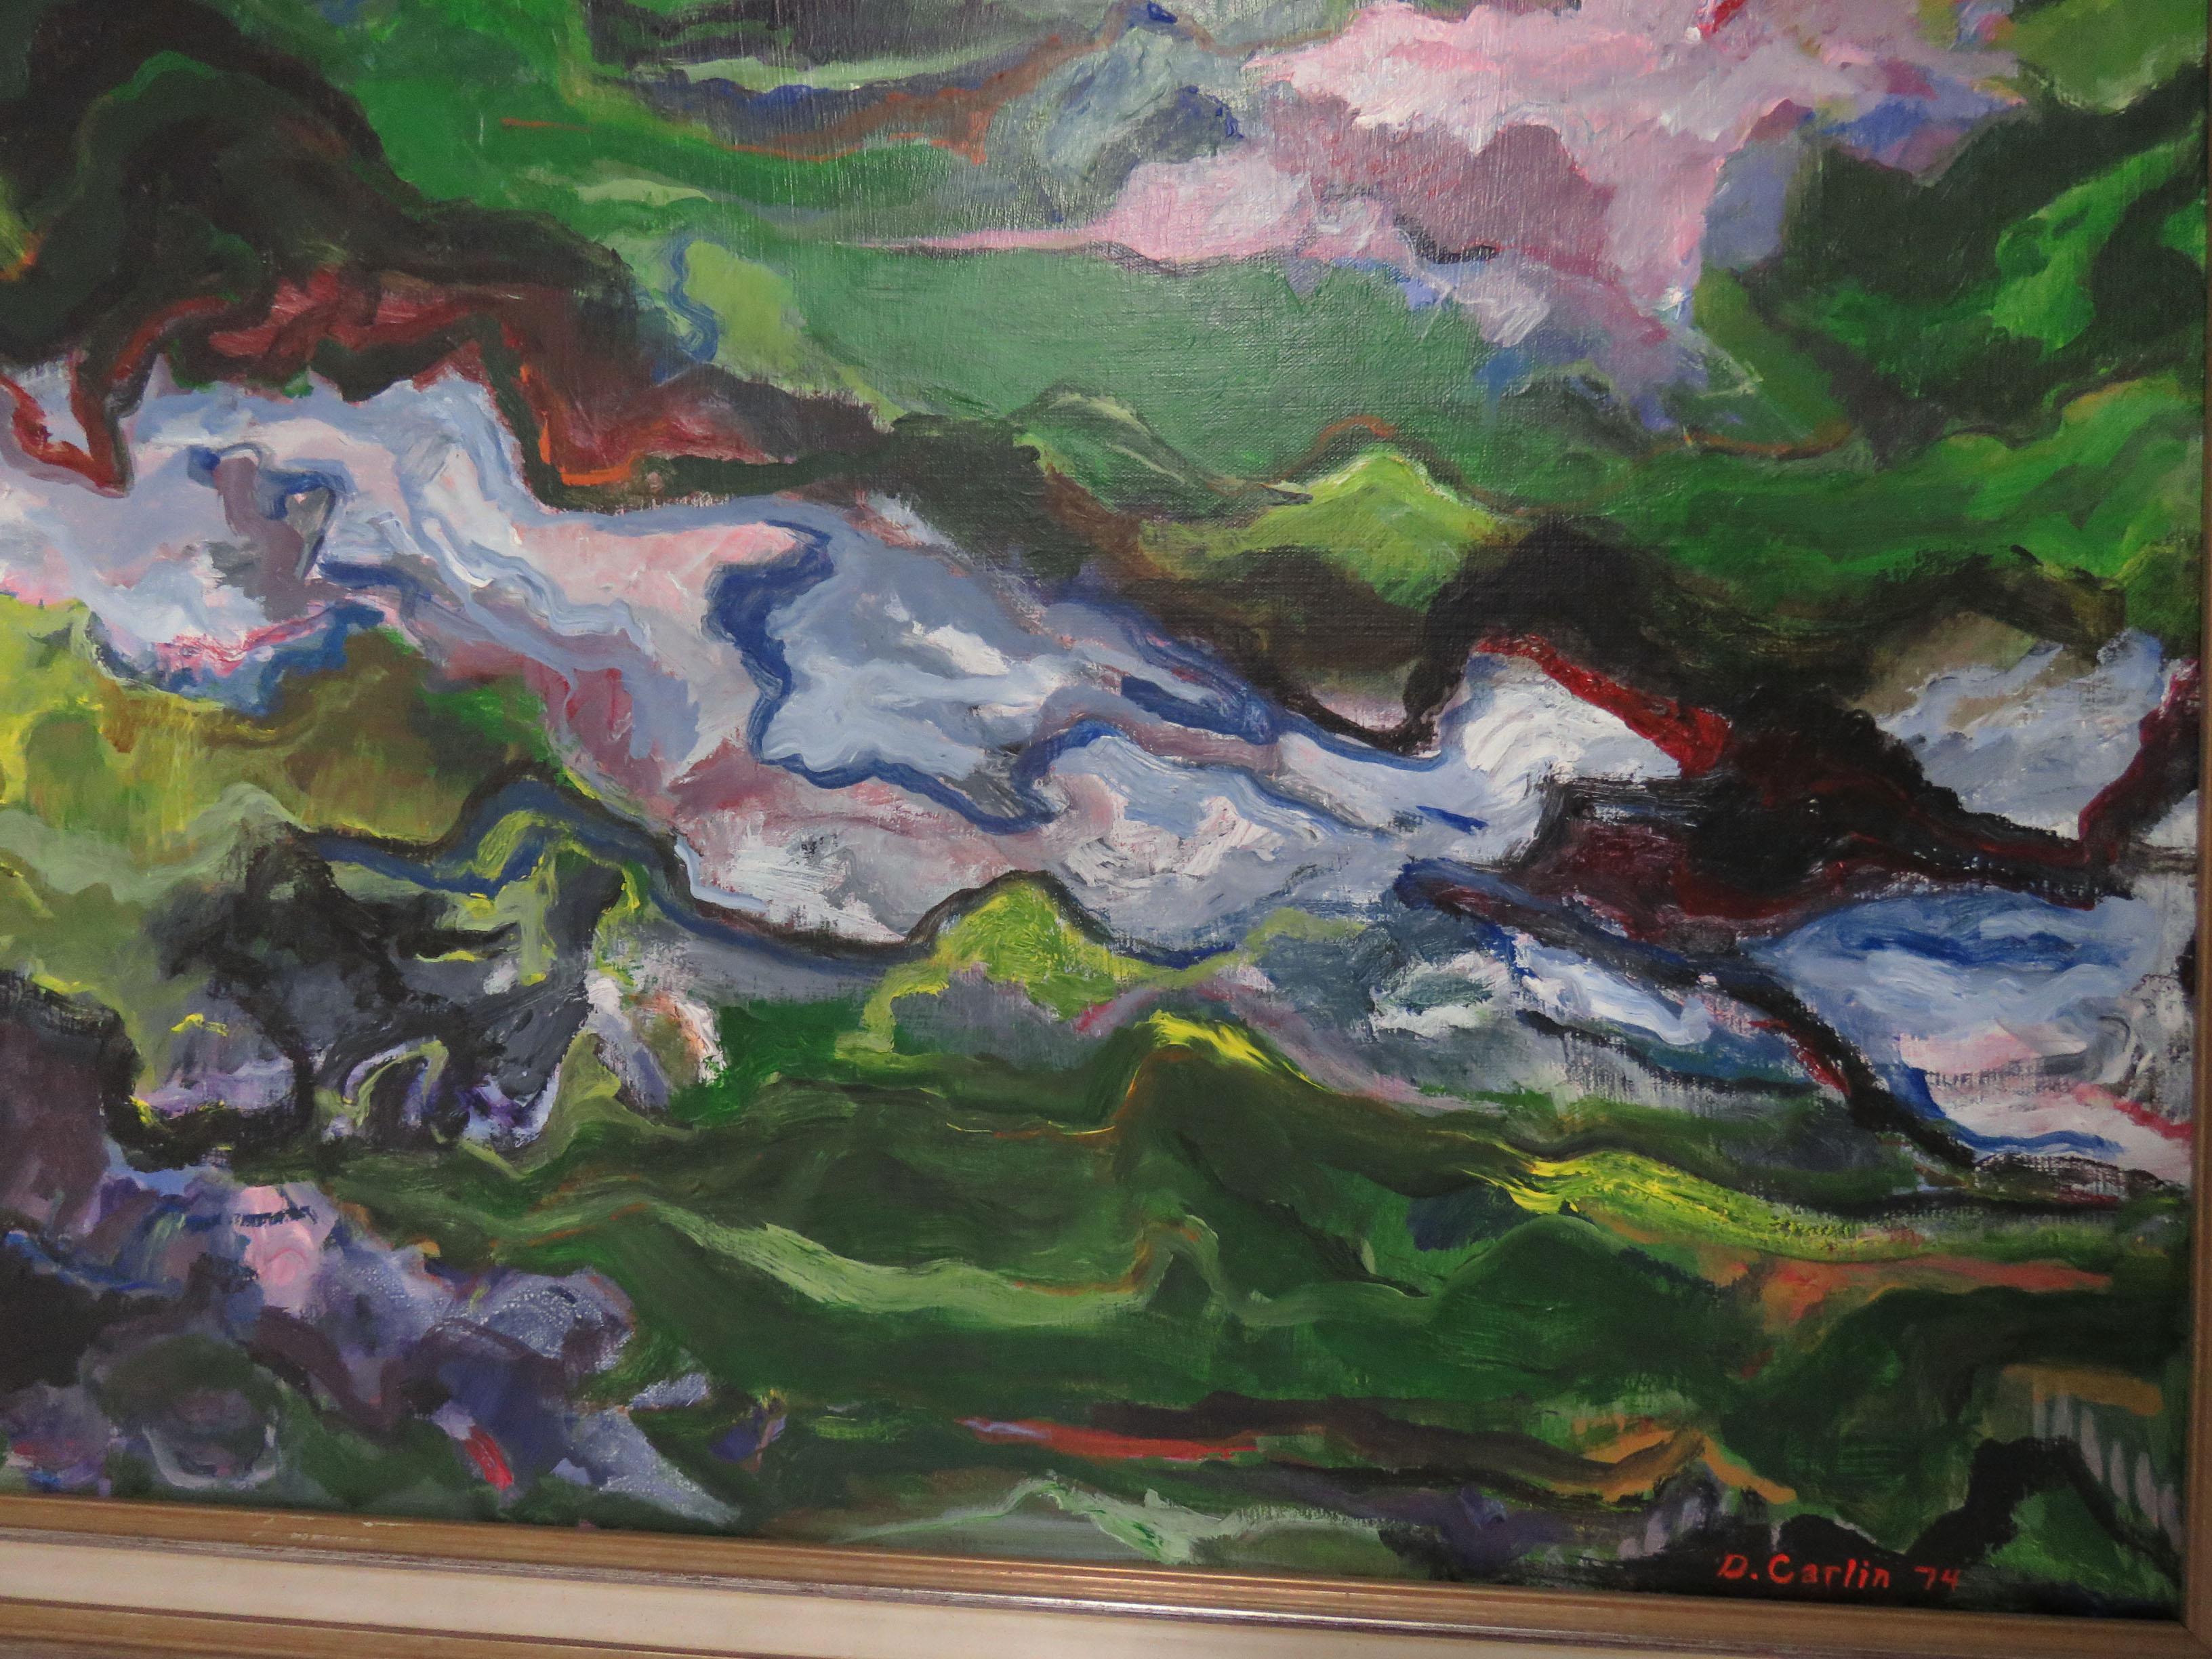 Modernist Abstract Landscape in the Fauvist Style, Signed and Dated 1974 1